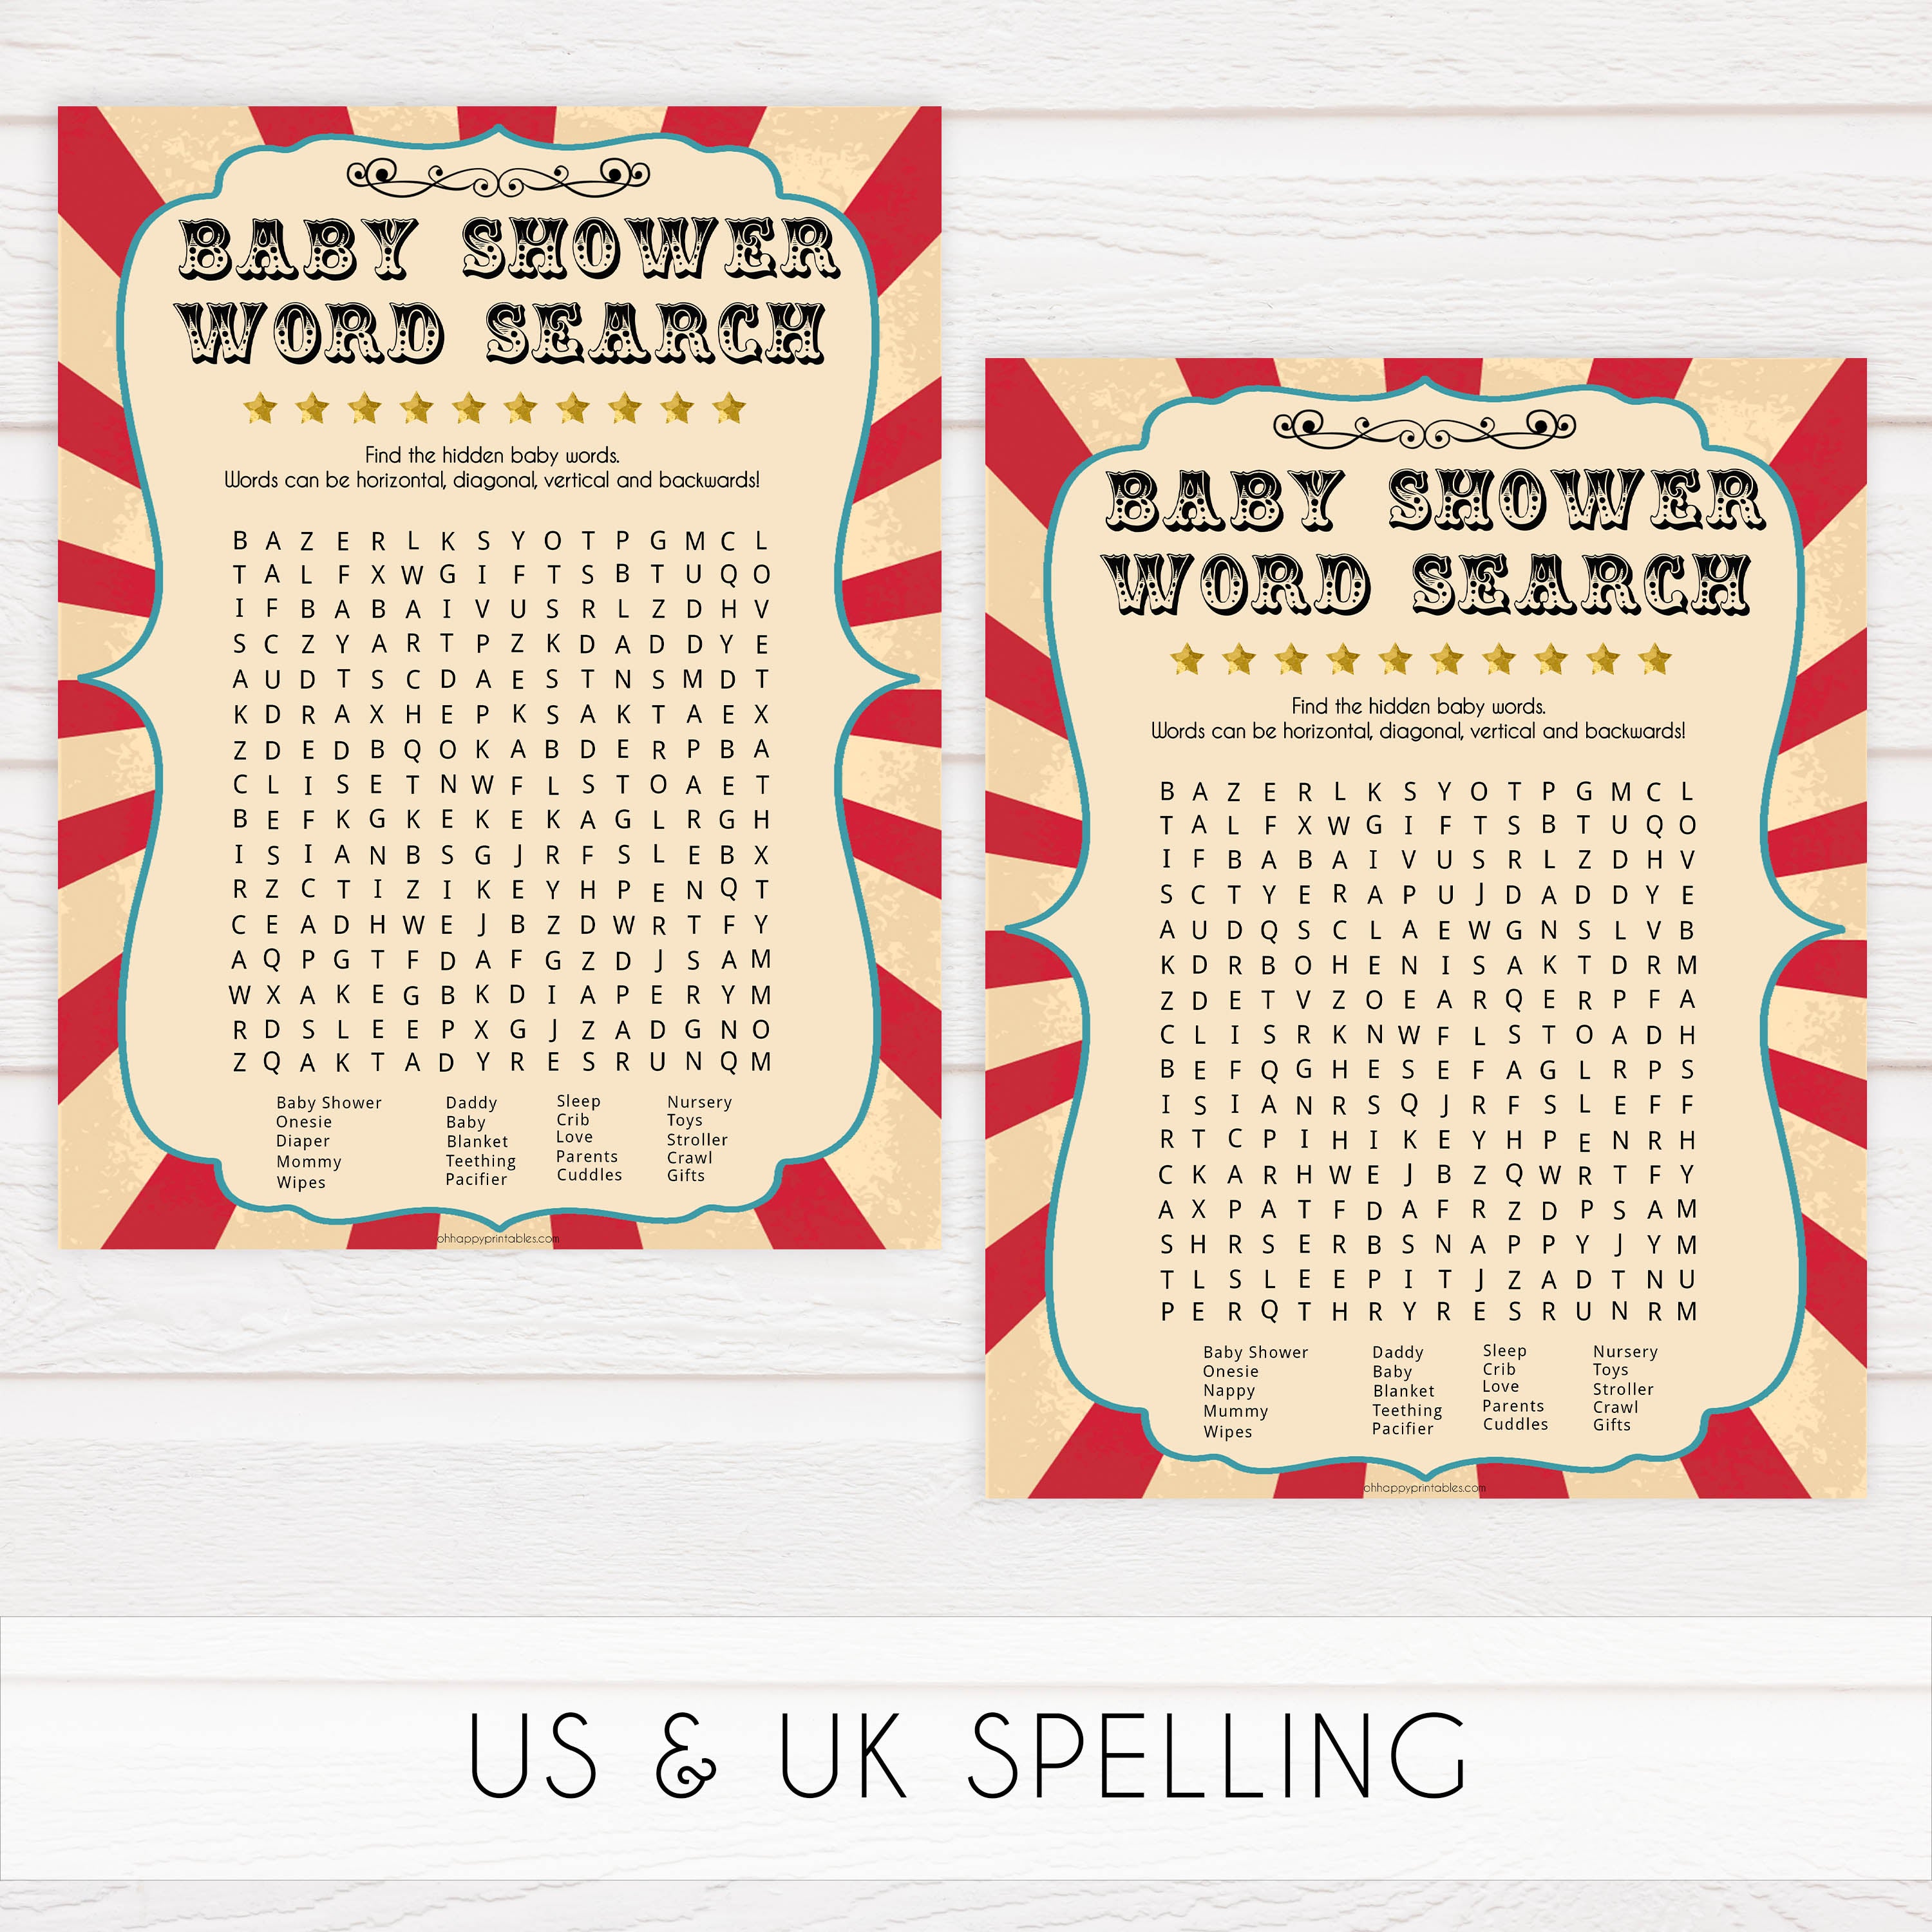 baby word search game, baby shower word search, Printable baby shower games, circus fun baby games, baby shower games, fun baby shower ideas, top baby shower ideas, carnival baby shower, circus baby shower ideas